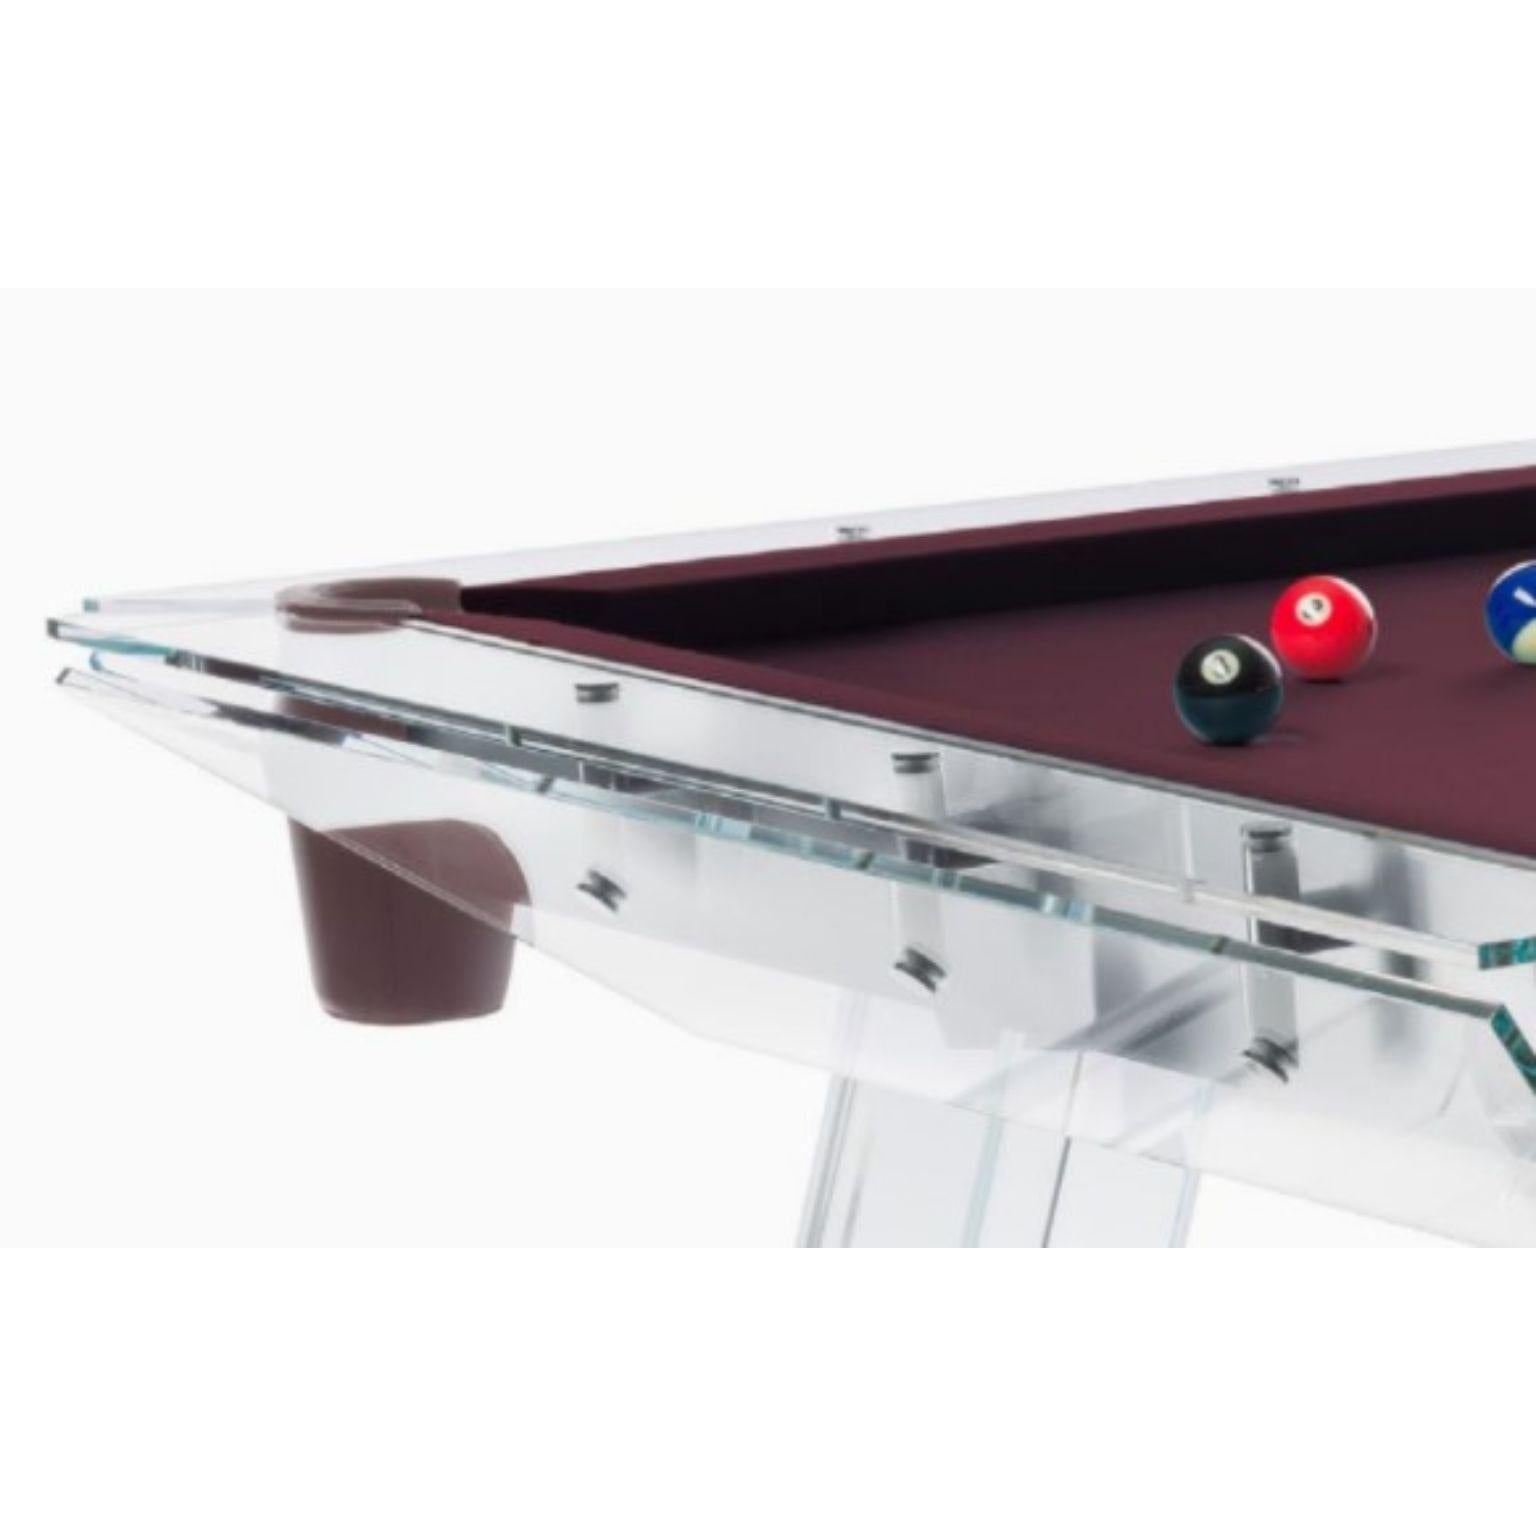 Post-Modern Filotto Gold Smoked Glass Player Pool Table by Impatia